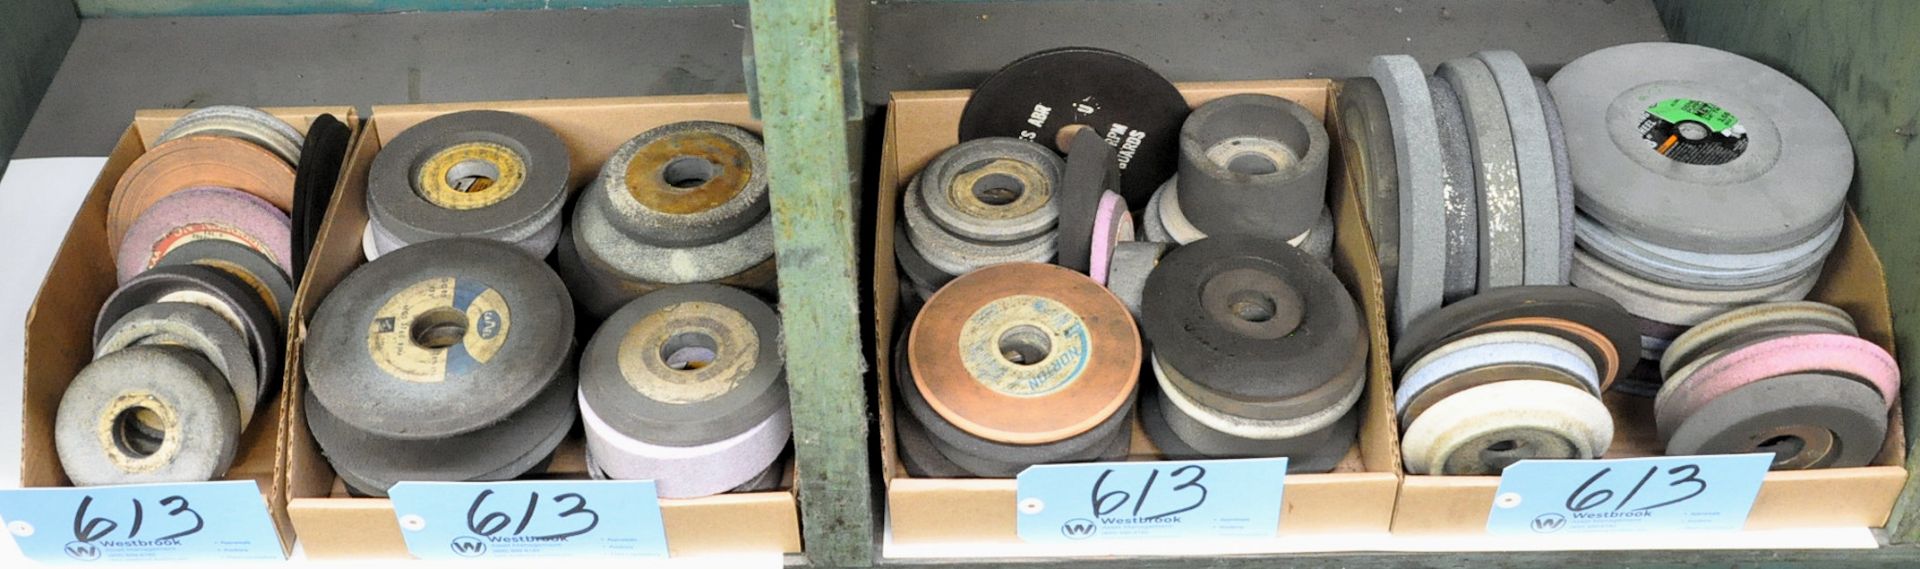 Lot-Used Grinding Wheels in (4) Boxes Under (1) Bench